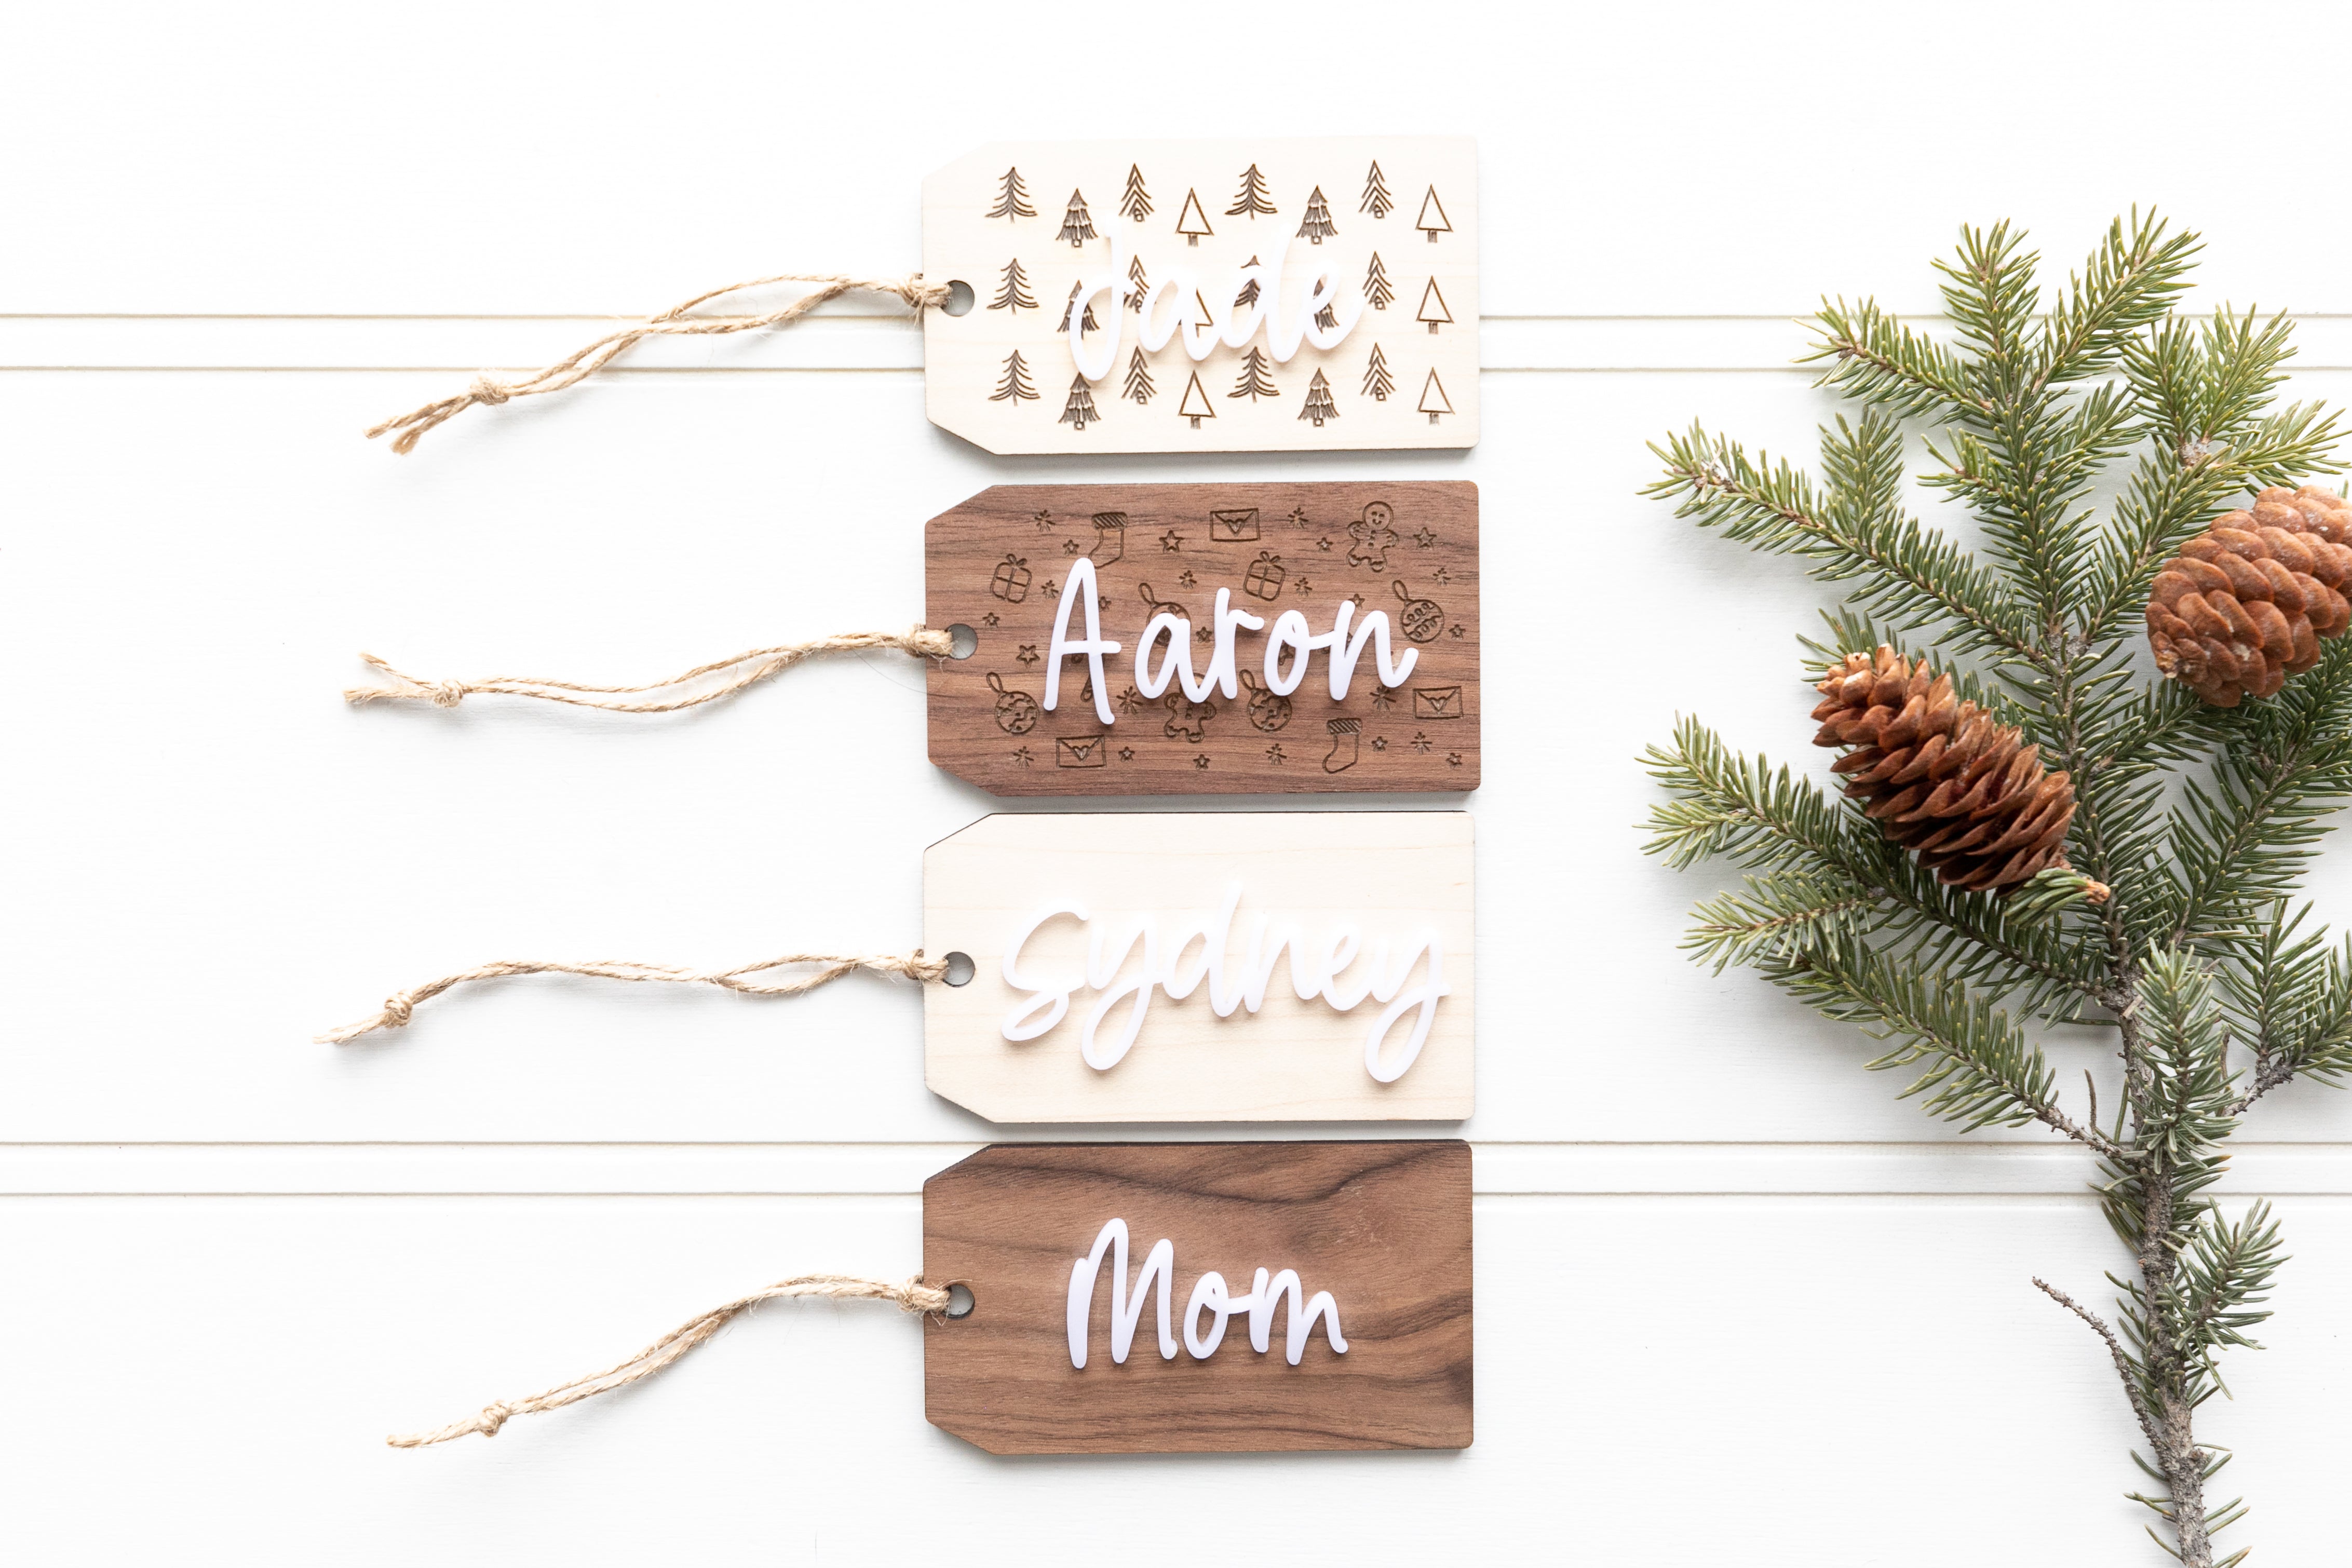 Personalized Christmas Stocking or Gift Tags